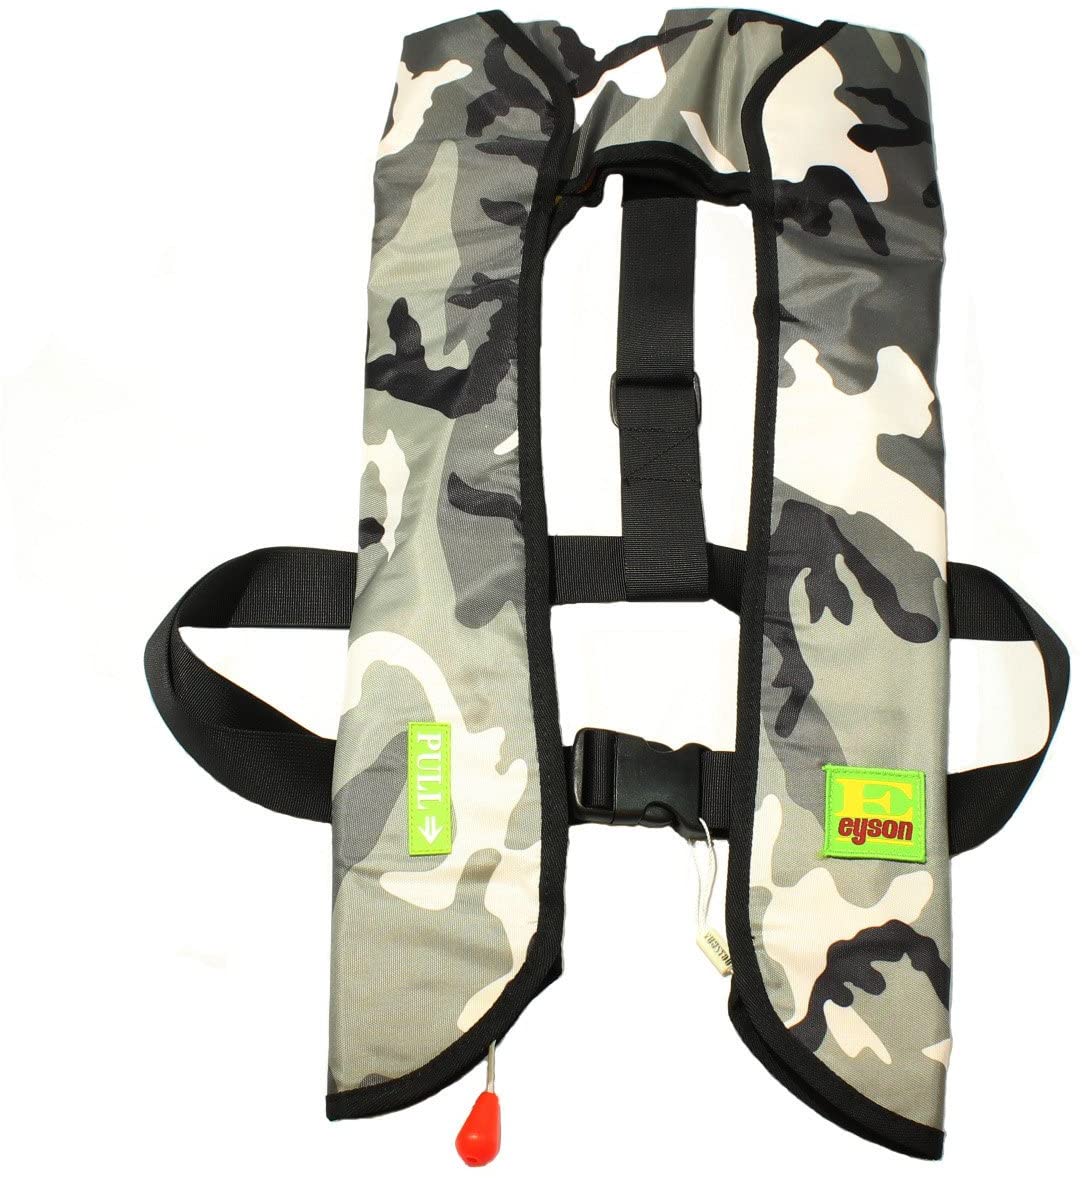 Adult Life Jacket with Whistle